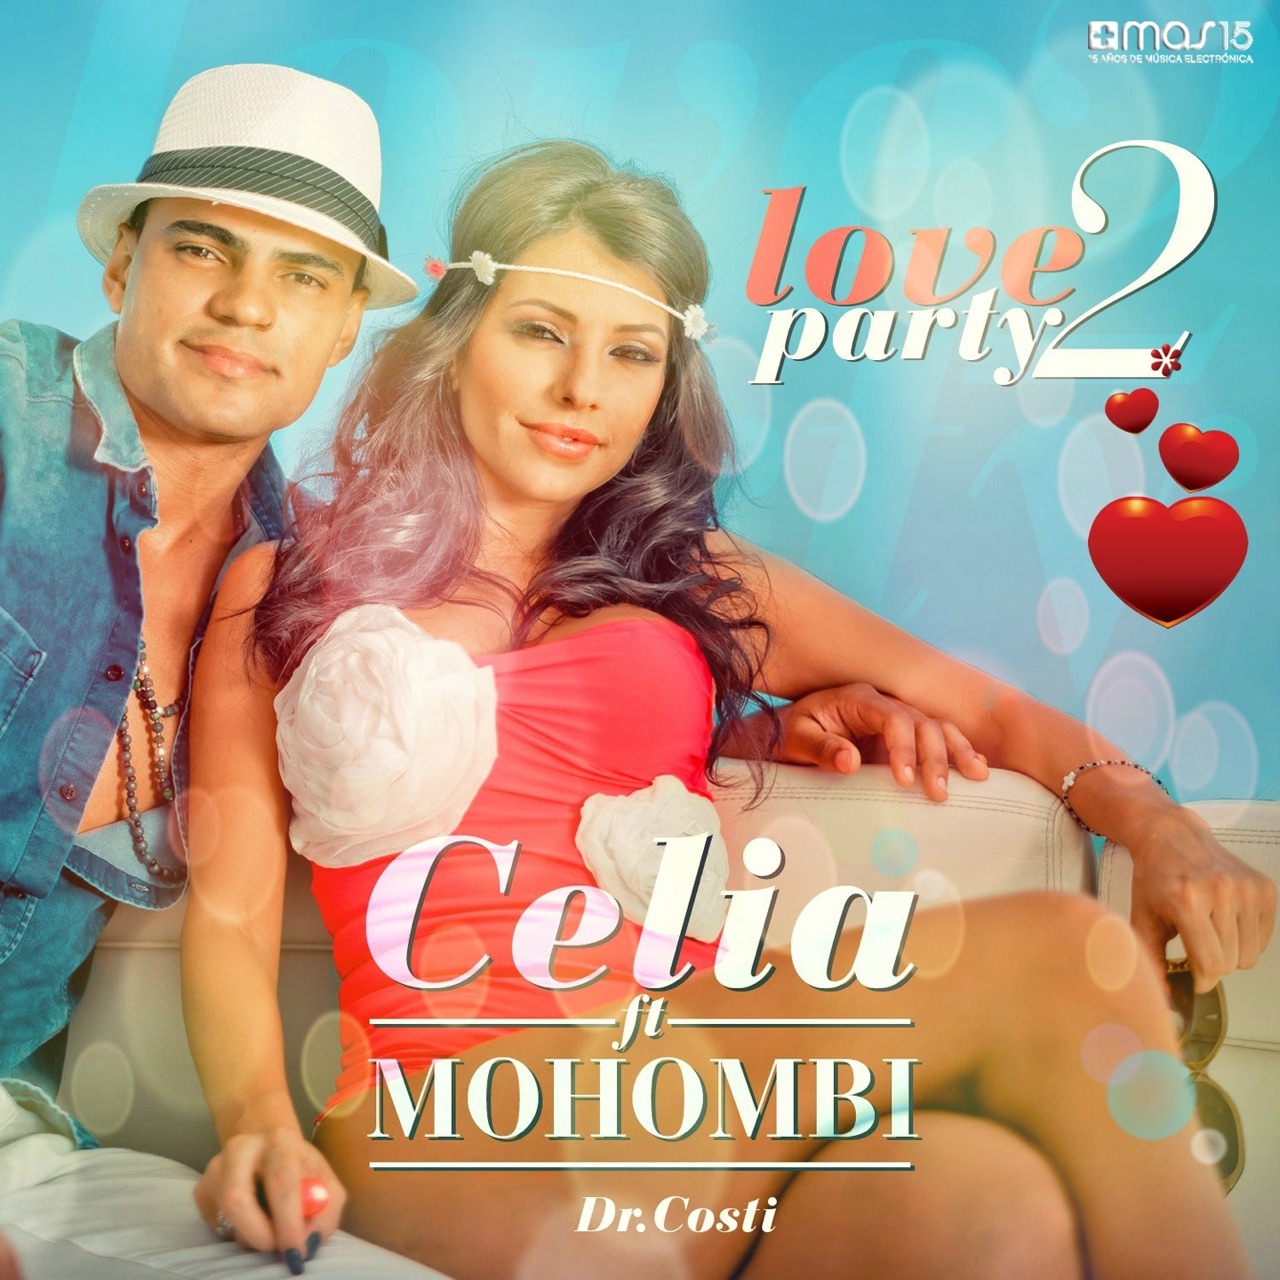 Celia ft. featuring Mohombi Love 2 Party cover artwork